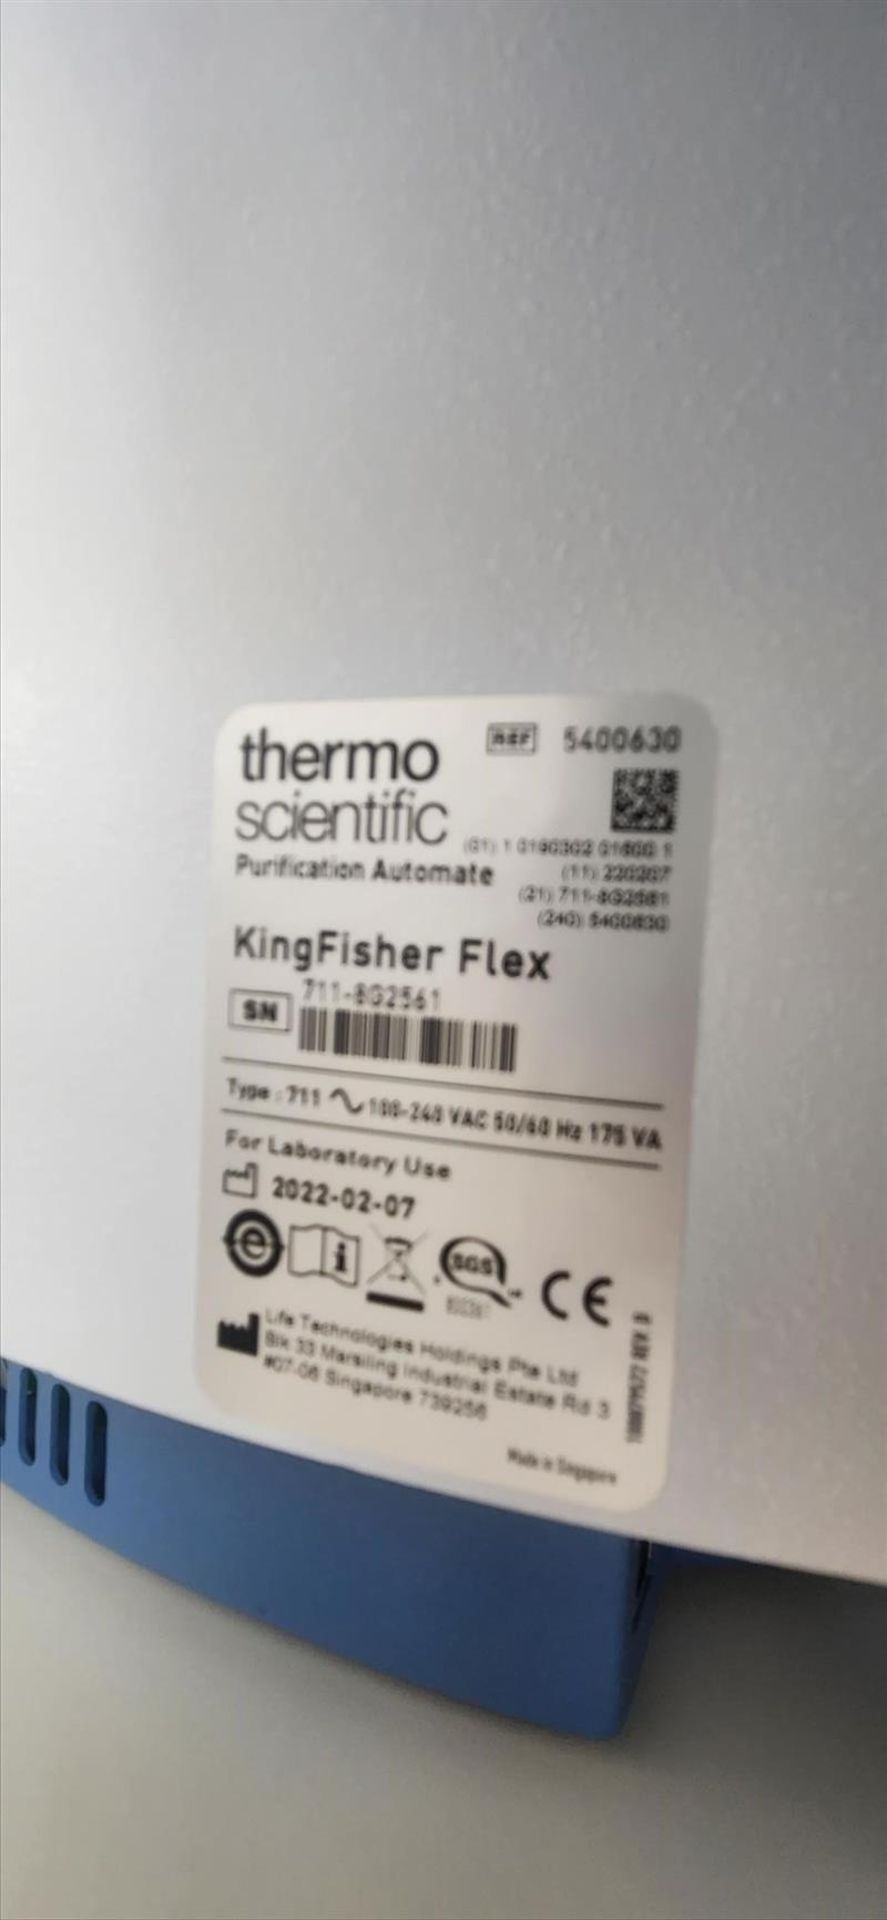 Thermo Scientific KingFisher Flex Purification System, Fully Automated, S/N 711-8G2561 - Image 4 of 4